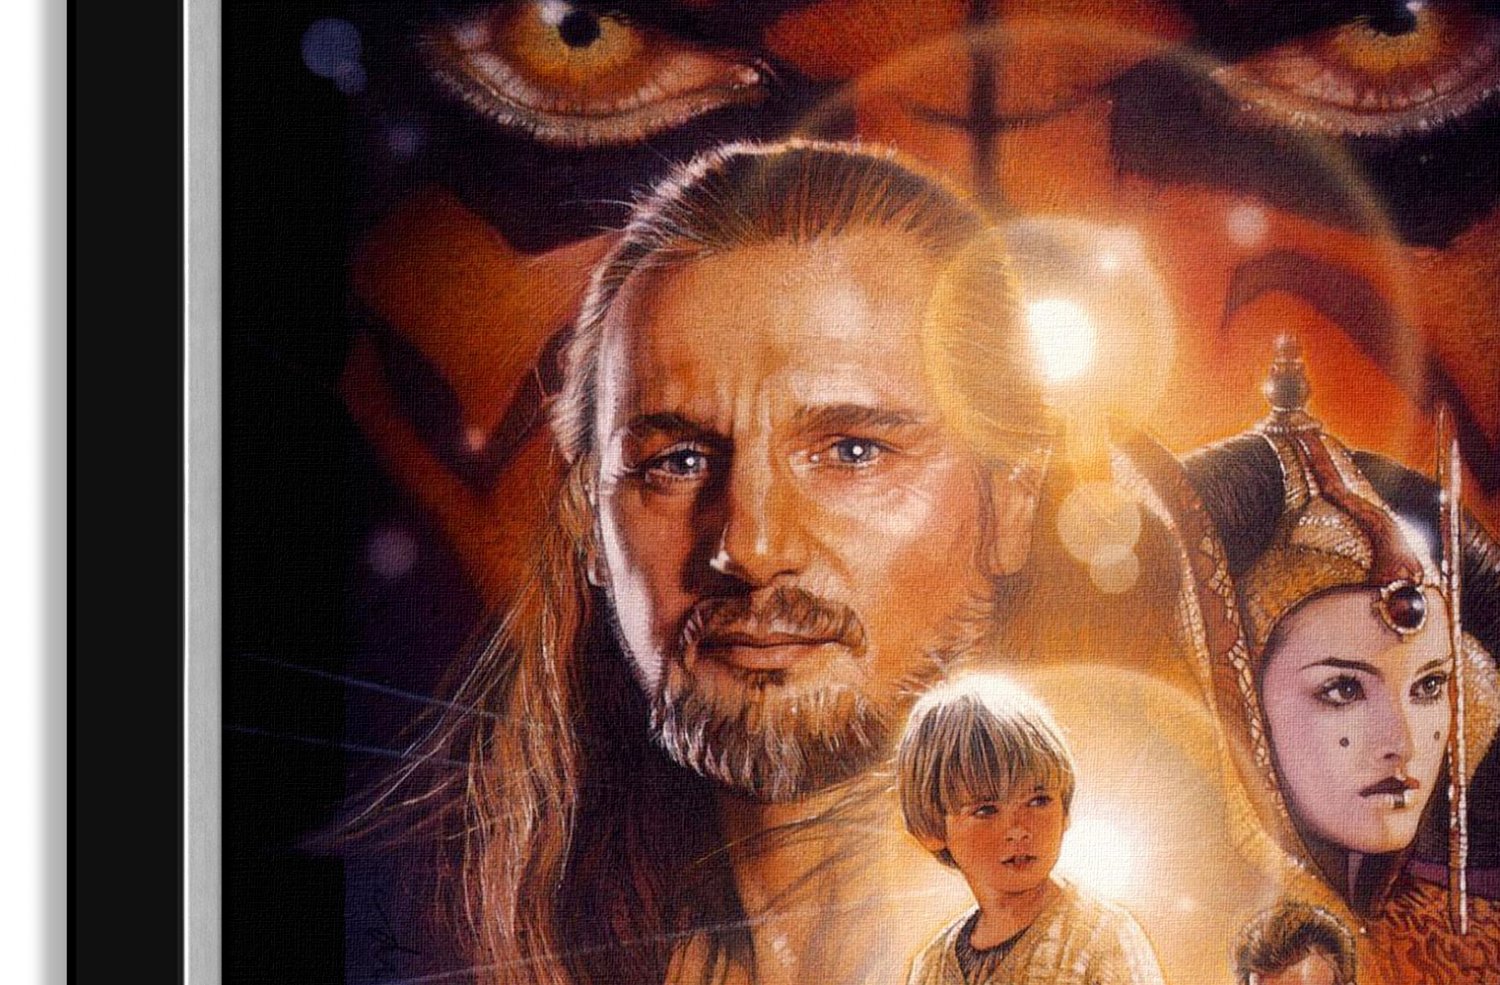 Star Wars Ep. I: The Phantom Menace instal the new version for android